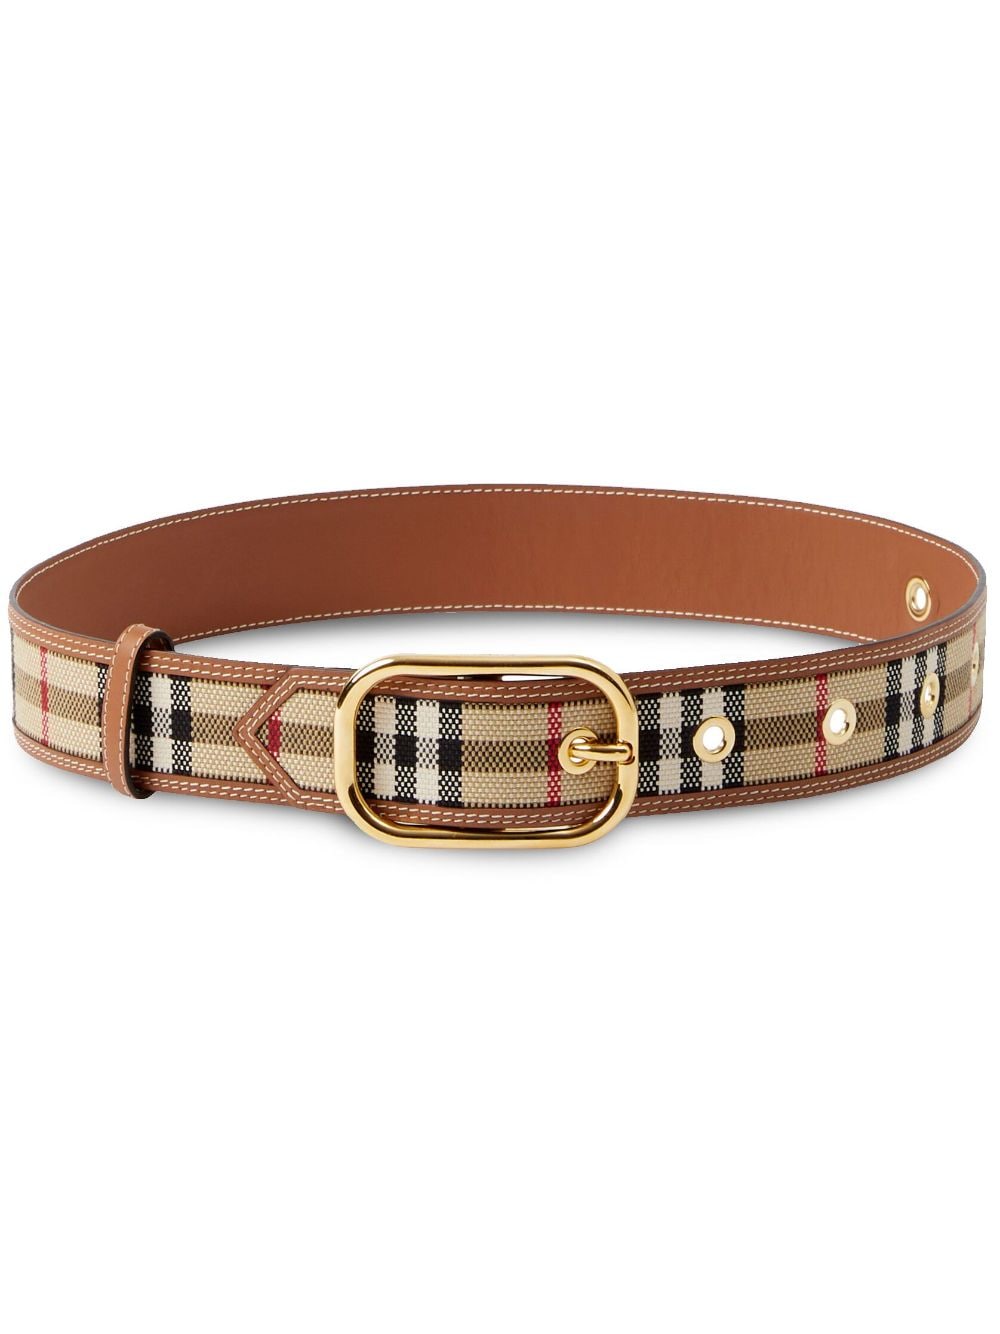 Burberry Vintage Check Leather Belt In Brown